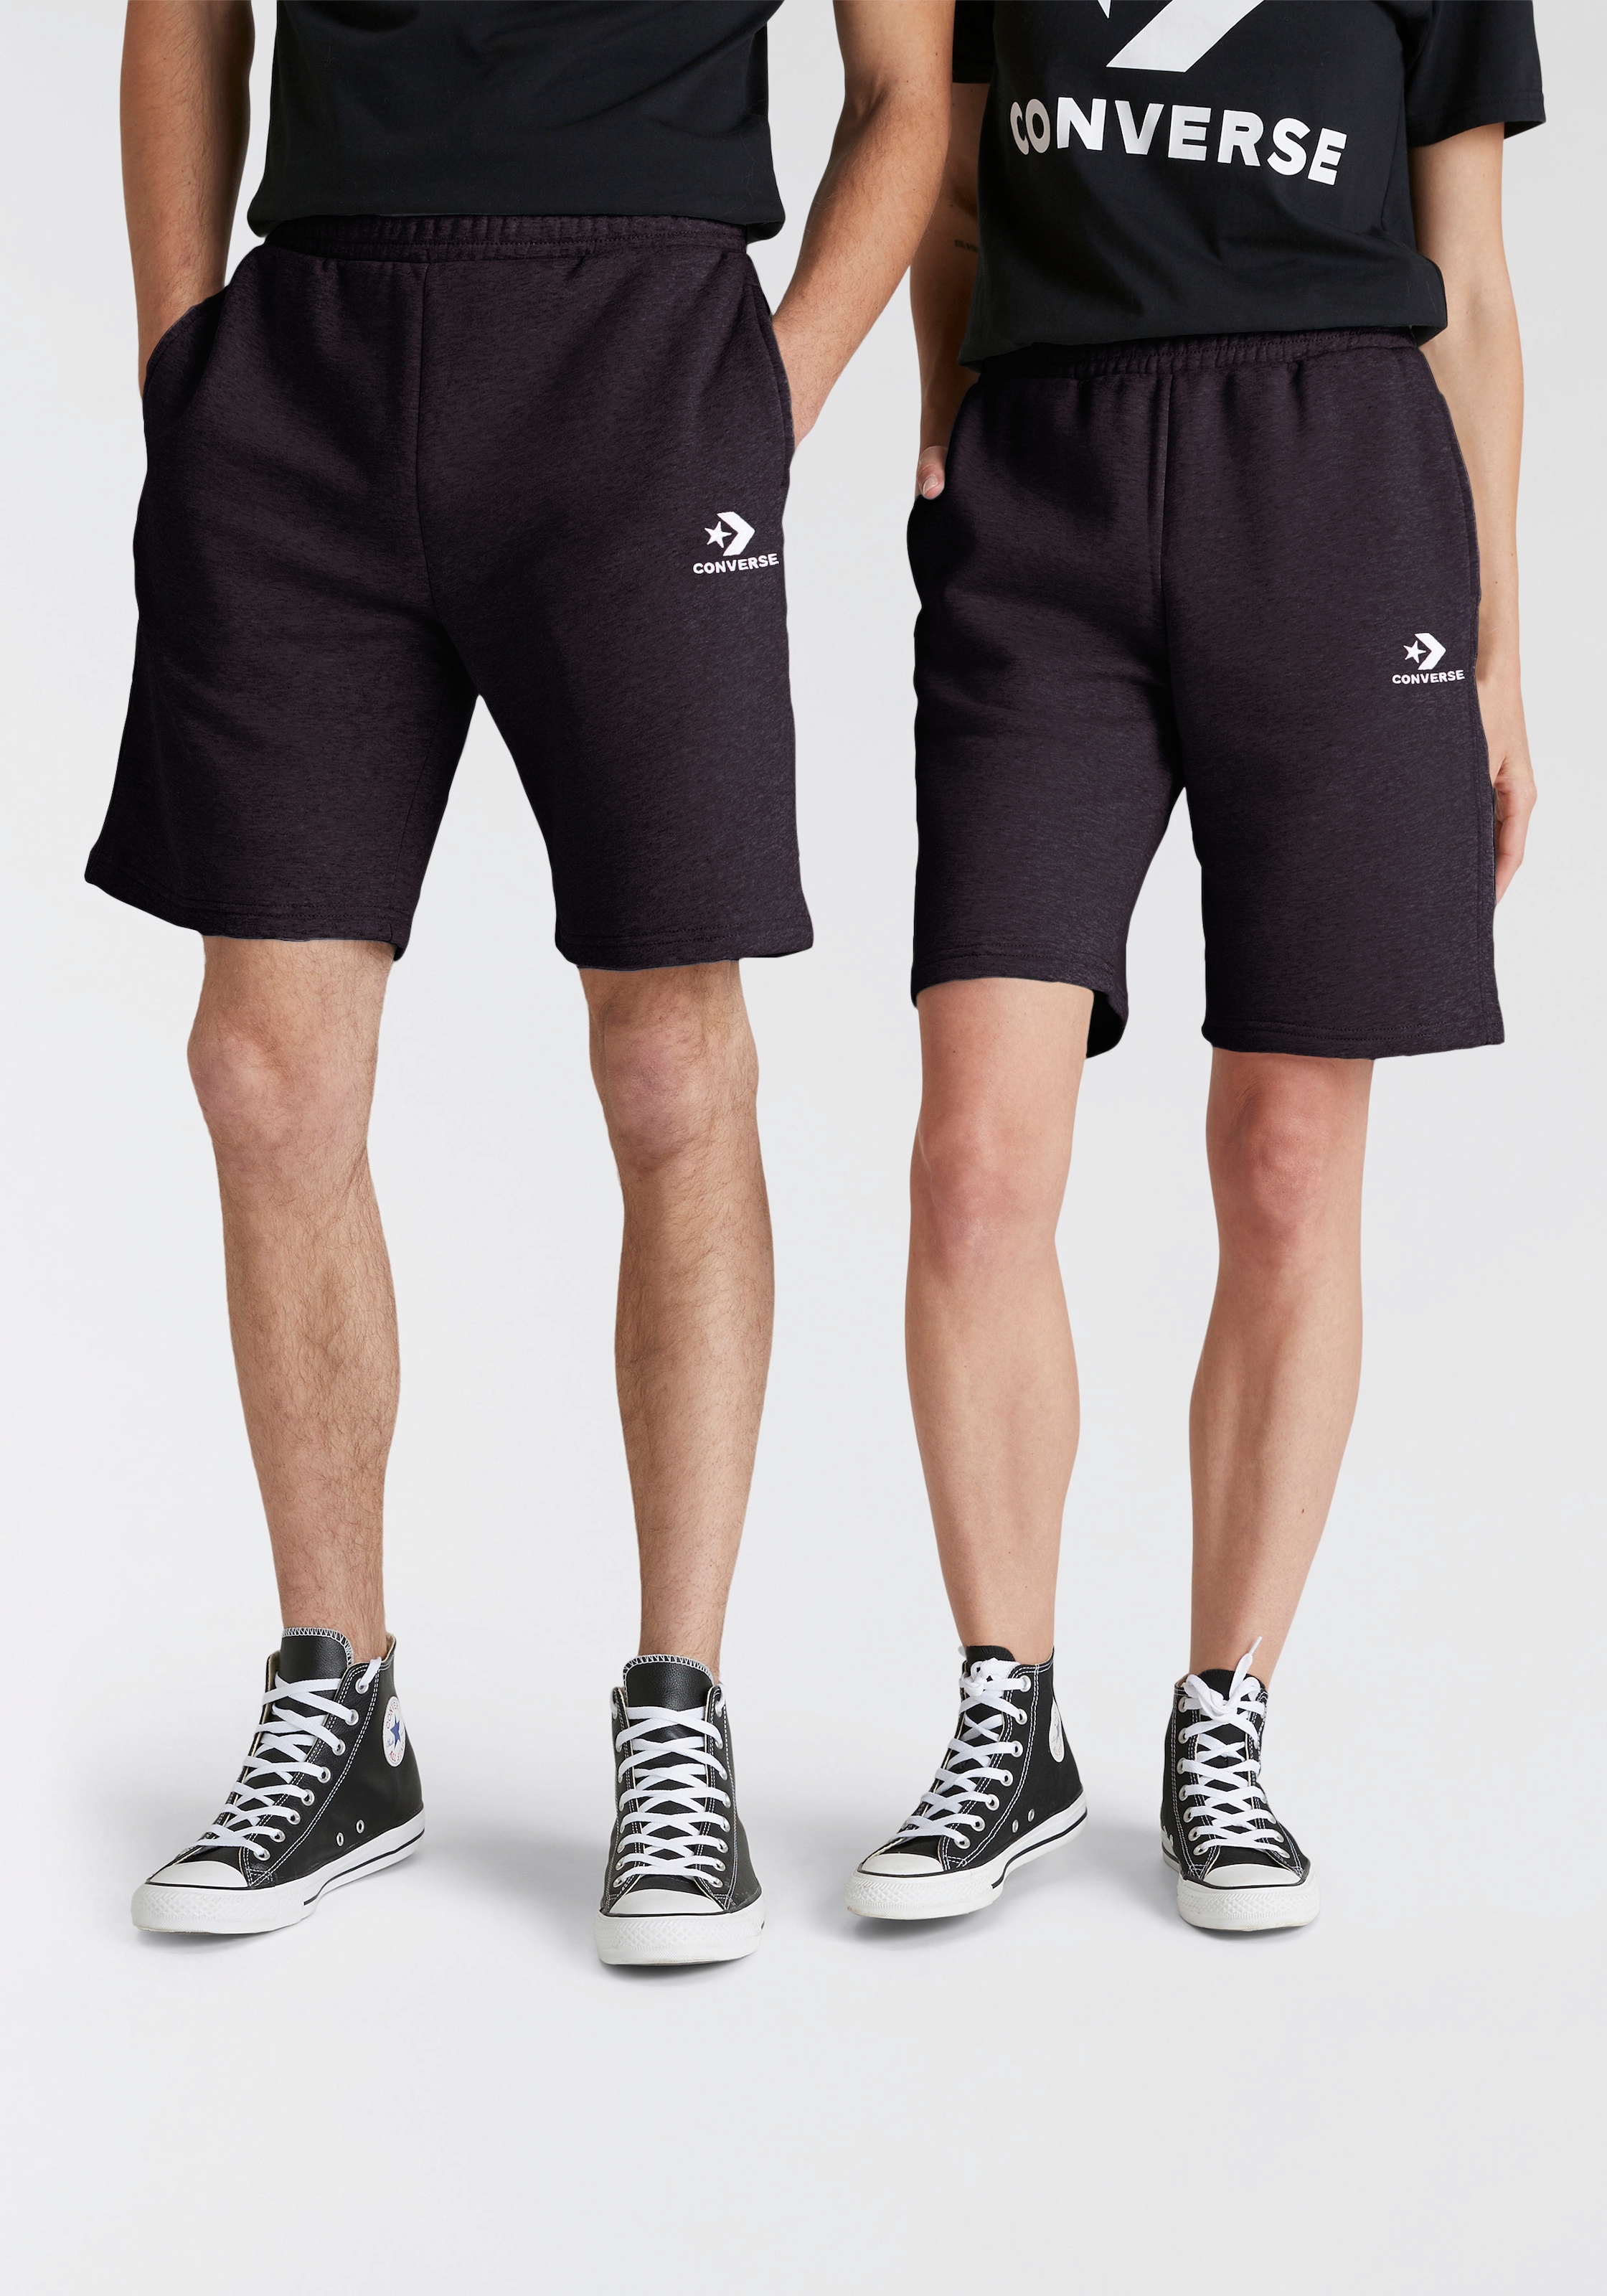 CHE«, (1 Converse EMBROIDERED STAR GO-TO »CONVERSE Sweatshorts tlg.) ♕ bei